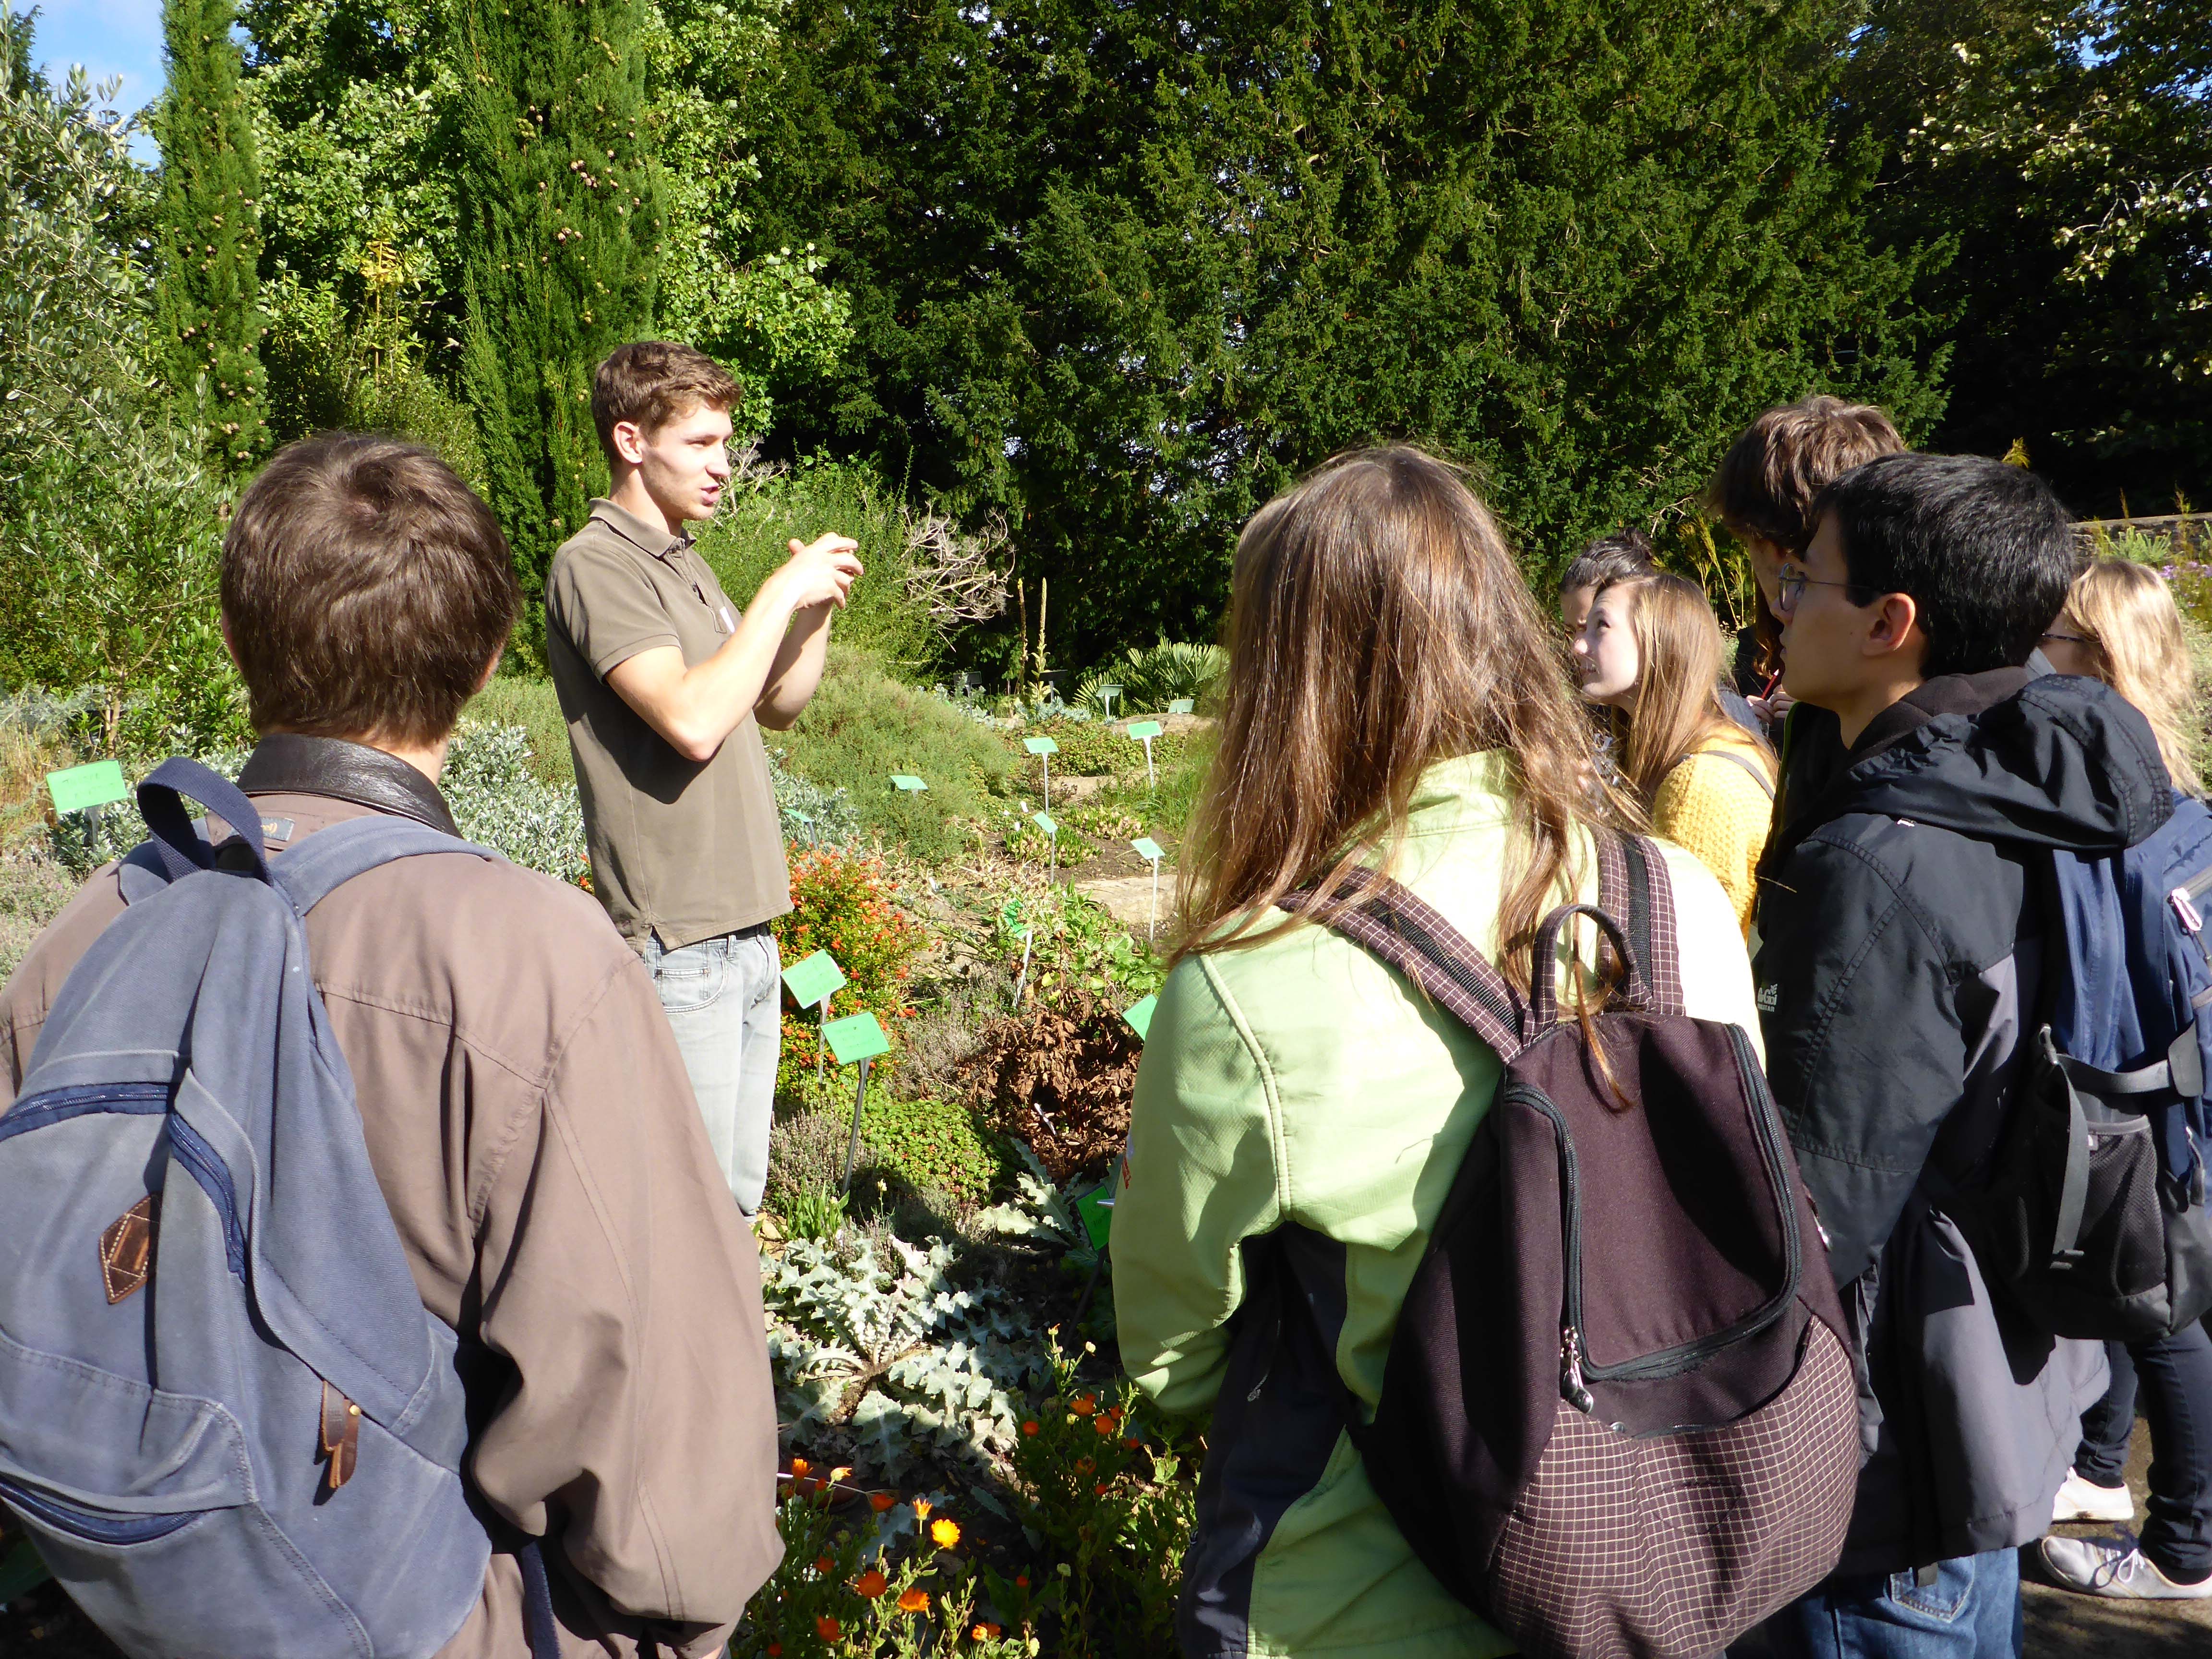 A group of students being given information by a staff member outside at the Botanic Gardens. There are large trees the background and plants all around.